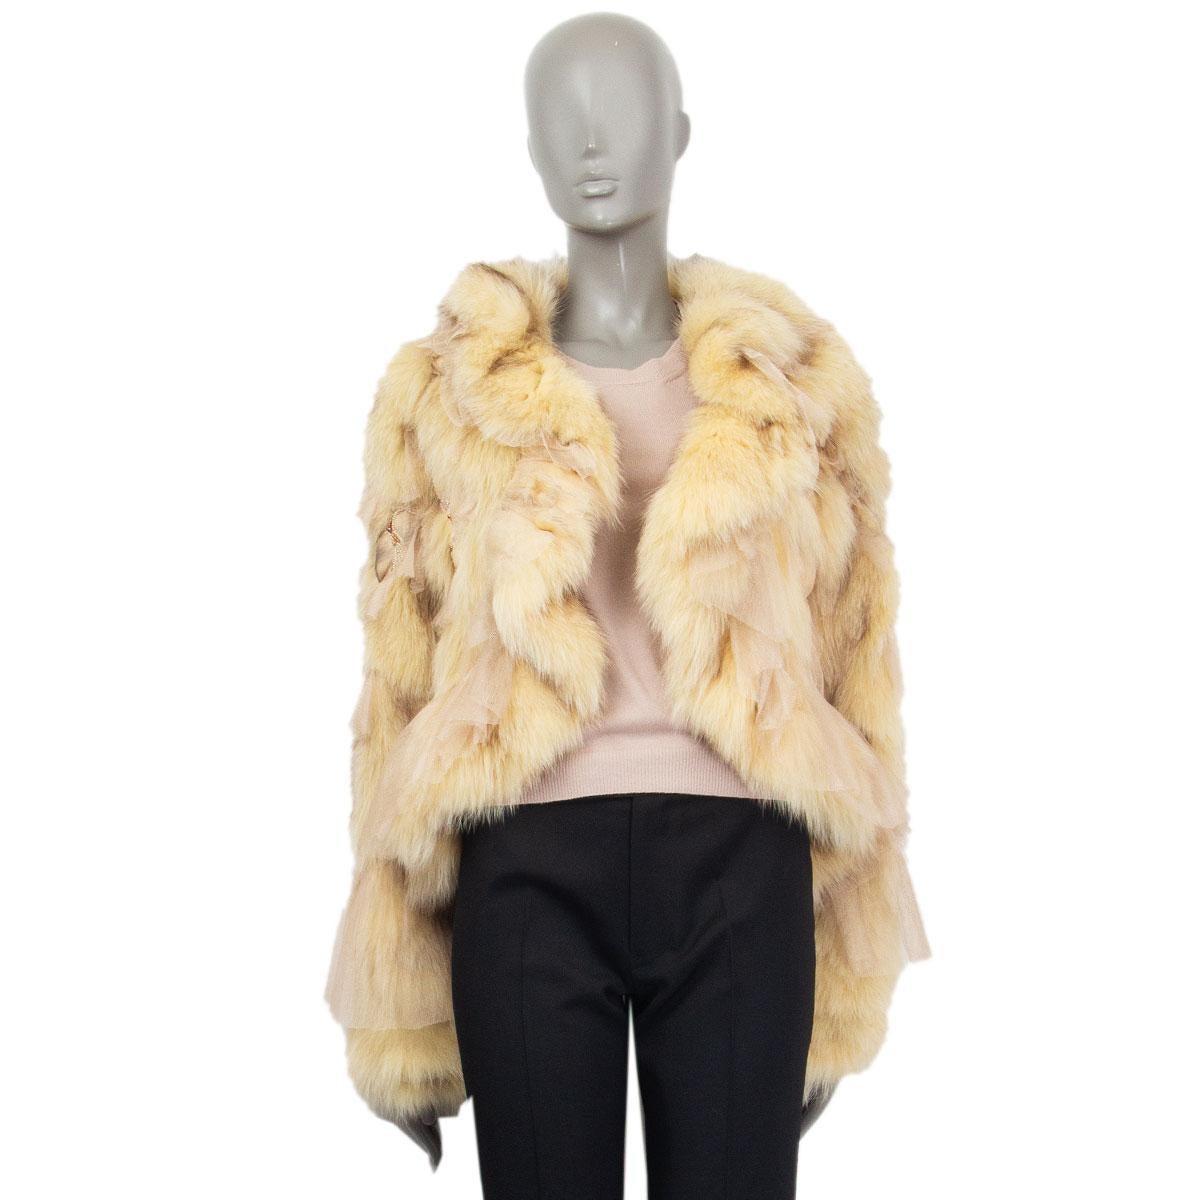 authentic John Galliano flared short jacket in cream fox fur (100%)  with ivory colour beads and powder pink mesh embroidery. Closes with one hook on the front. Lined in powder pink silk (100%). Has been worn and is in excellent condition.

Tag Size